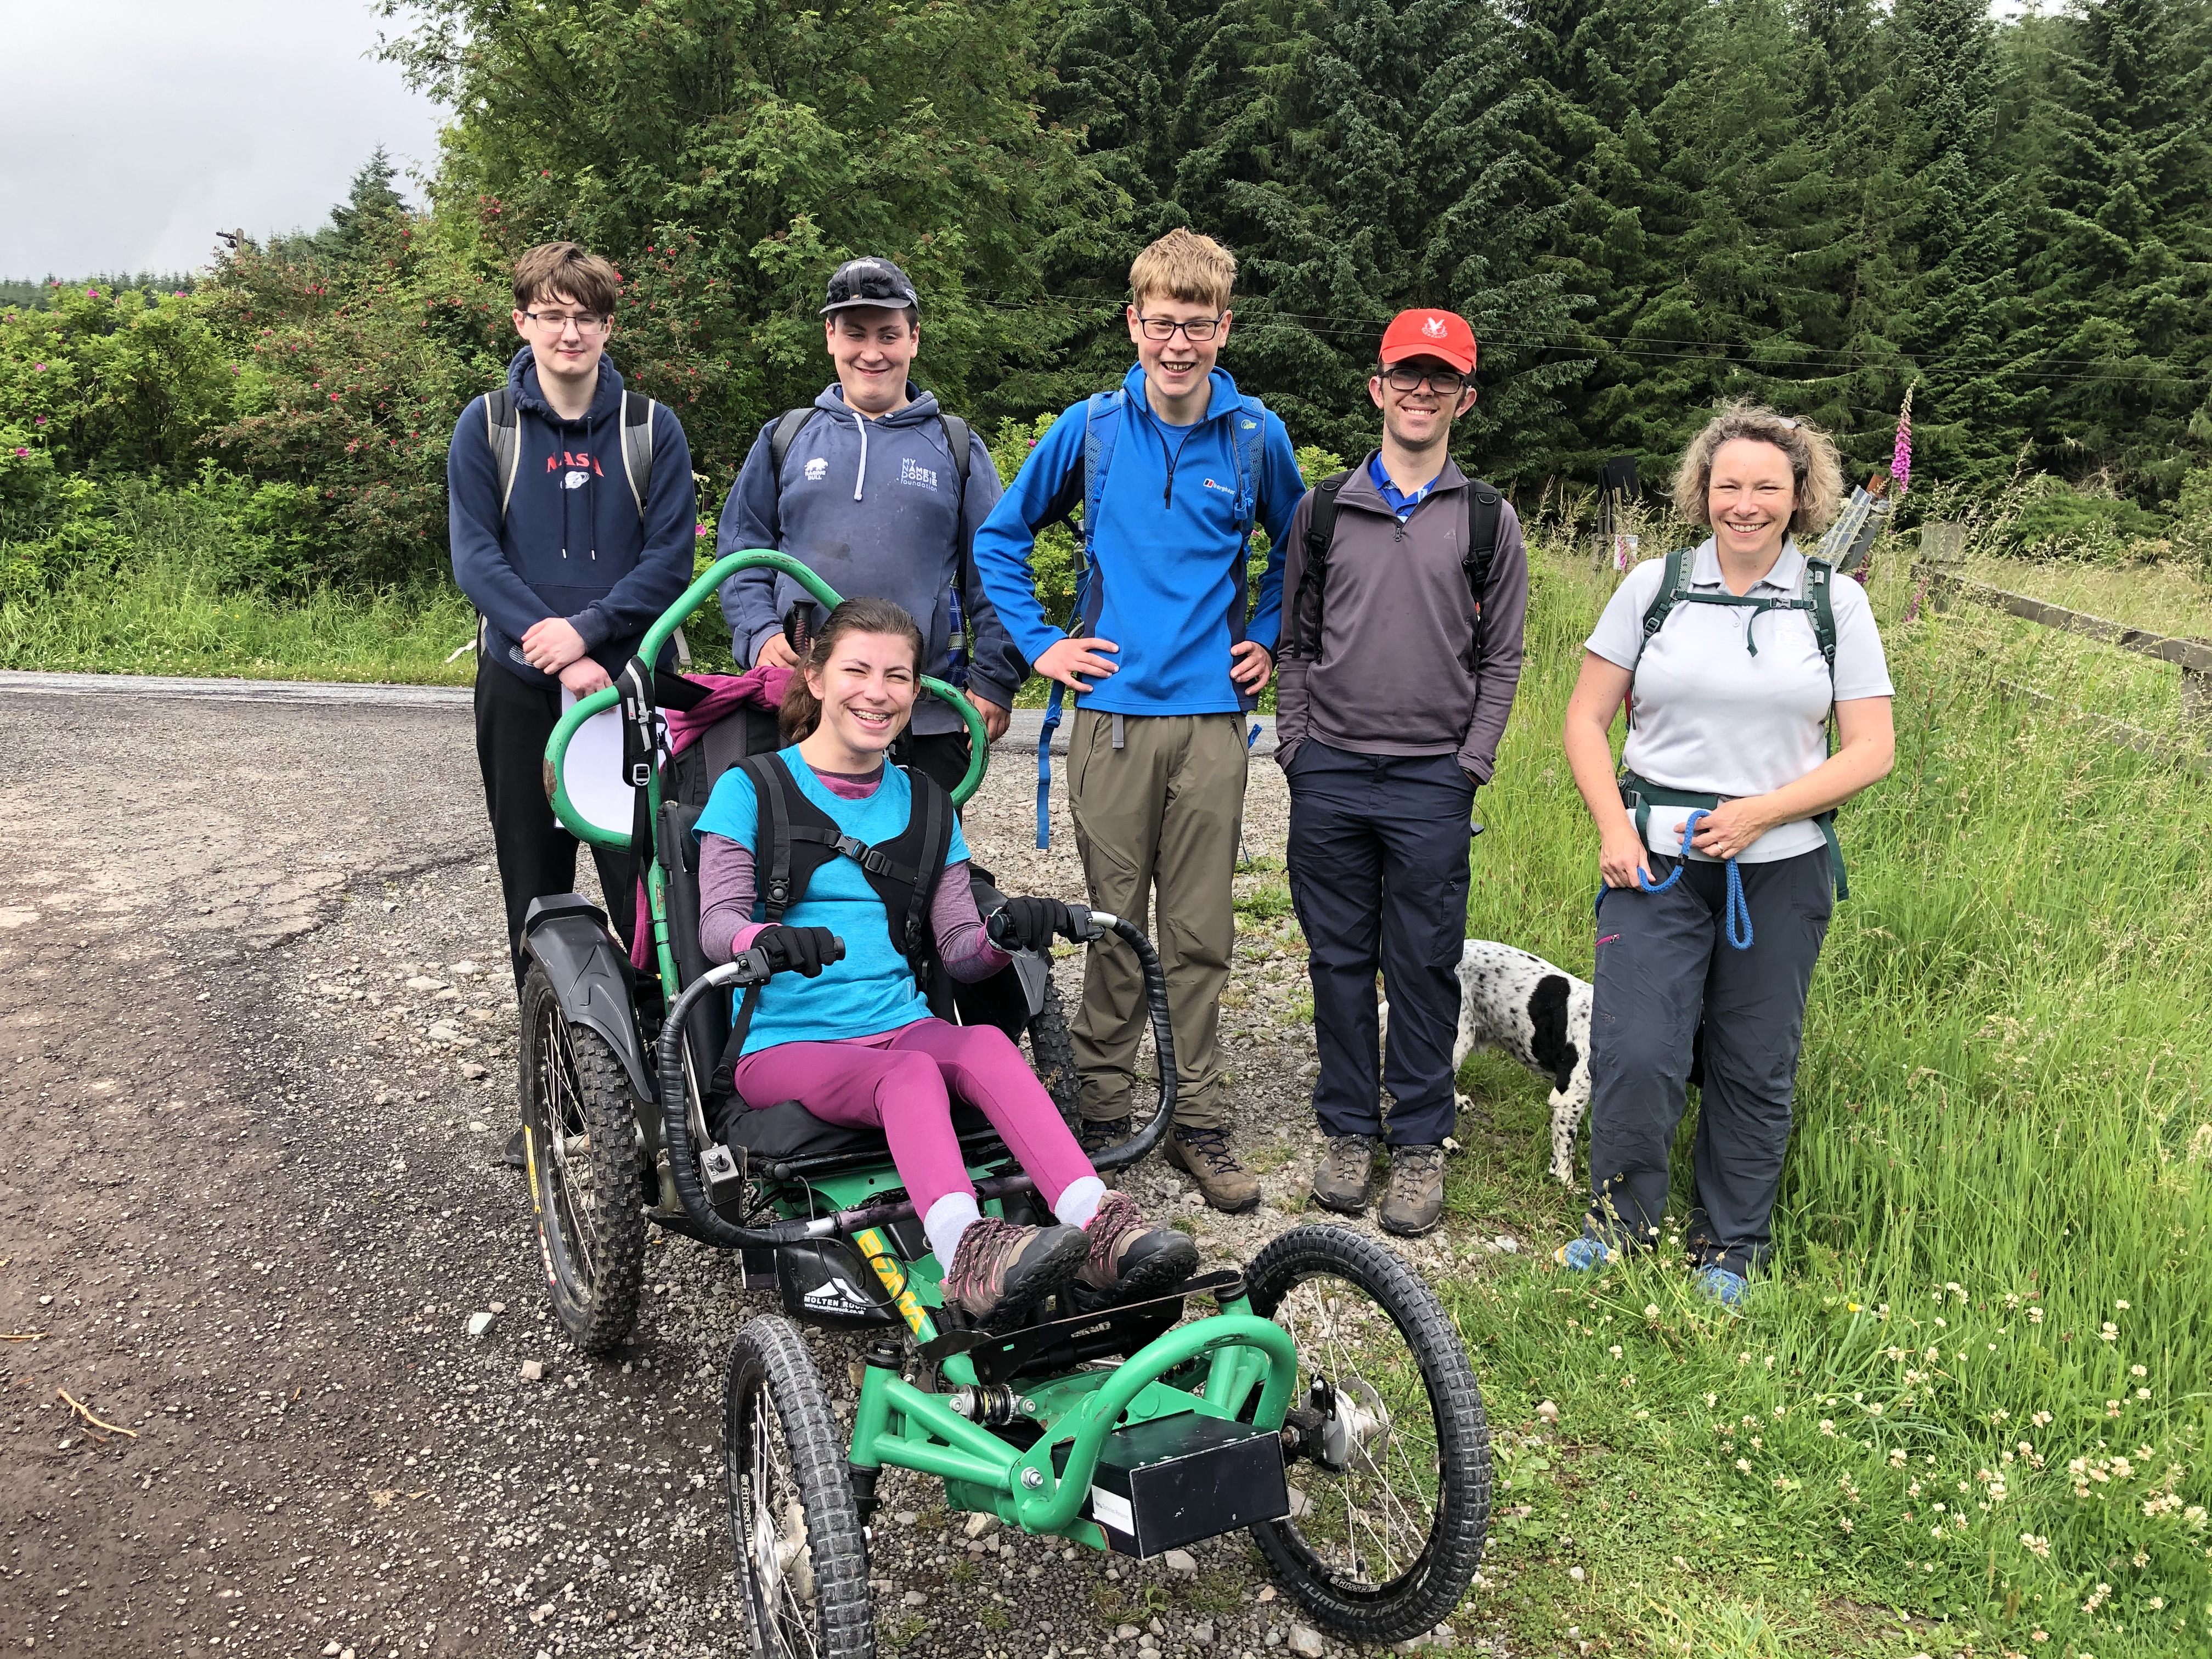 Why expeditions are a great experience – A report by Kayleigh